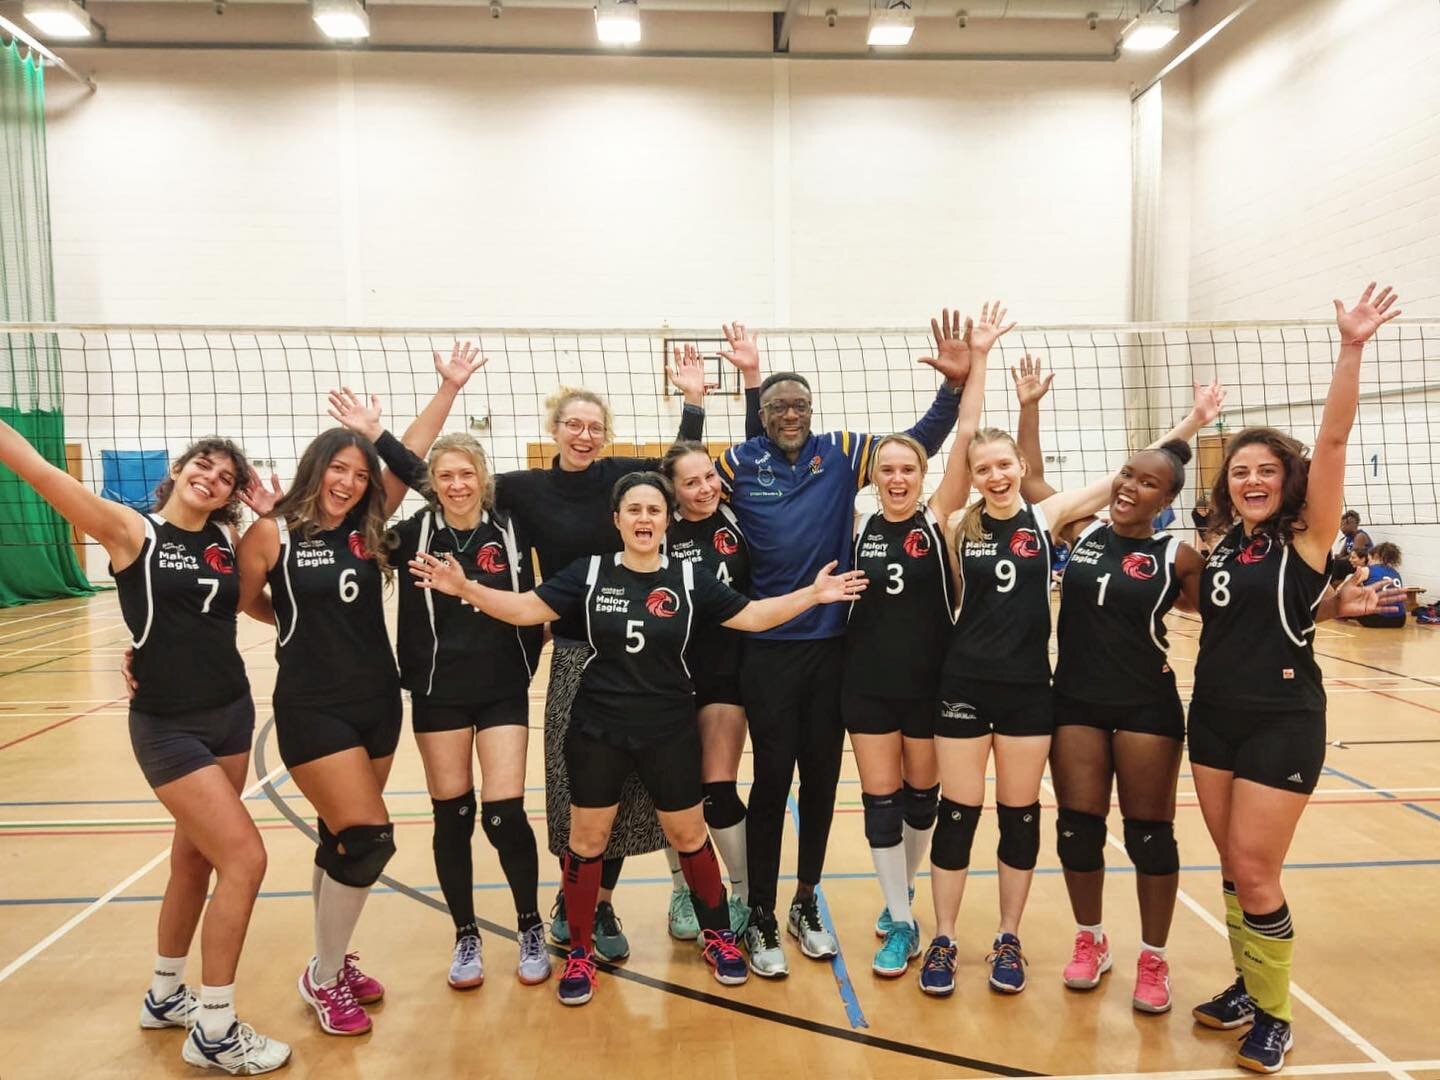 📣ARE YOU READY?📣

We are looking for new players for this coming season!

𝗠𝗲𝗻&rsquo;𝘀 𝗧𝗿𝗶𝗮𝗹𝘀

🏐Wed 24 August 19.30-21.30
🏐Wed 31 August 19.30-21.30

 📍Tooting Leisure centre

For National Super League, London League Division 1 and Lond